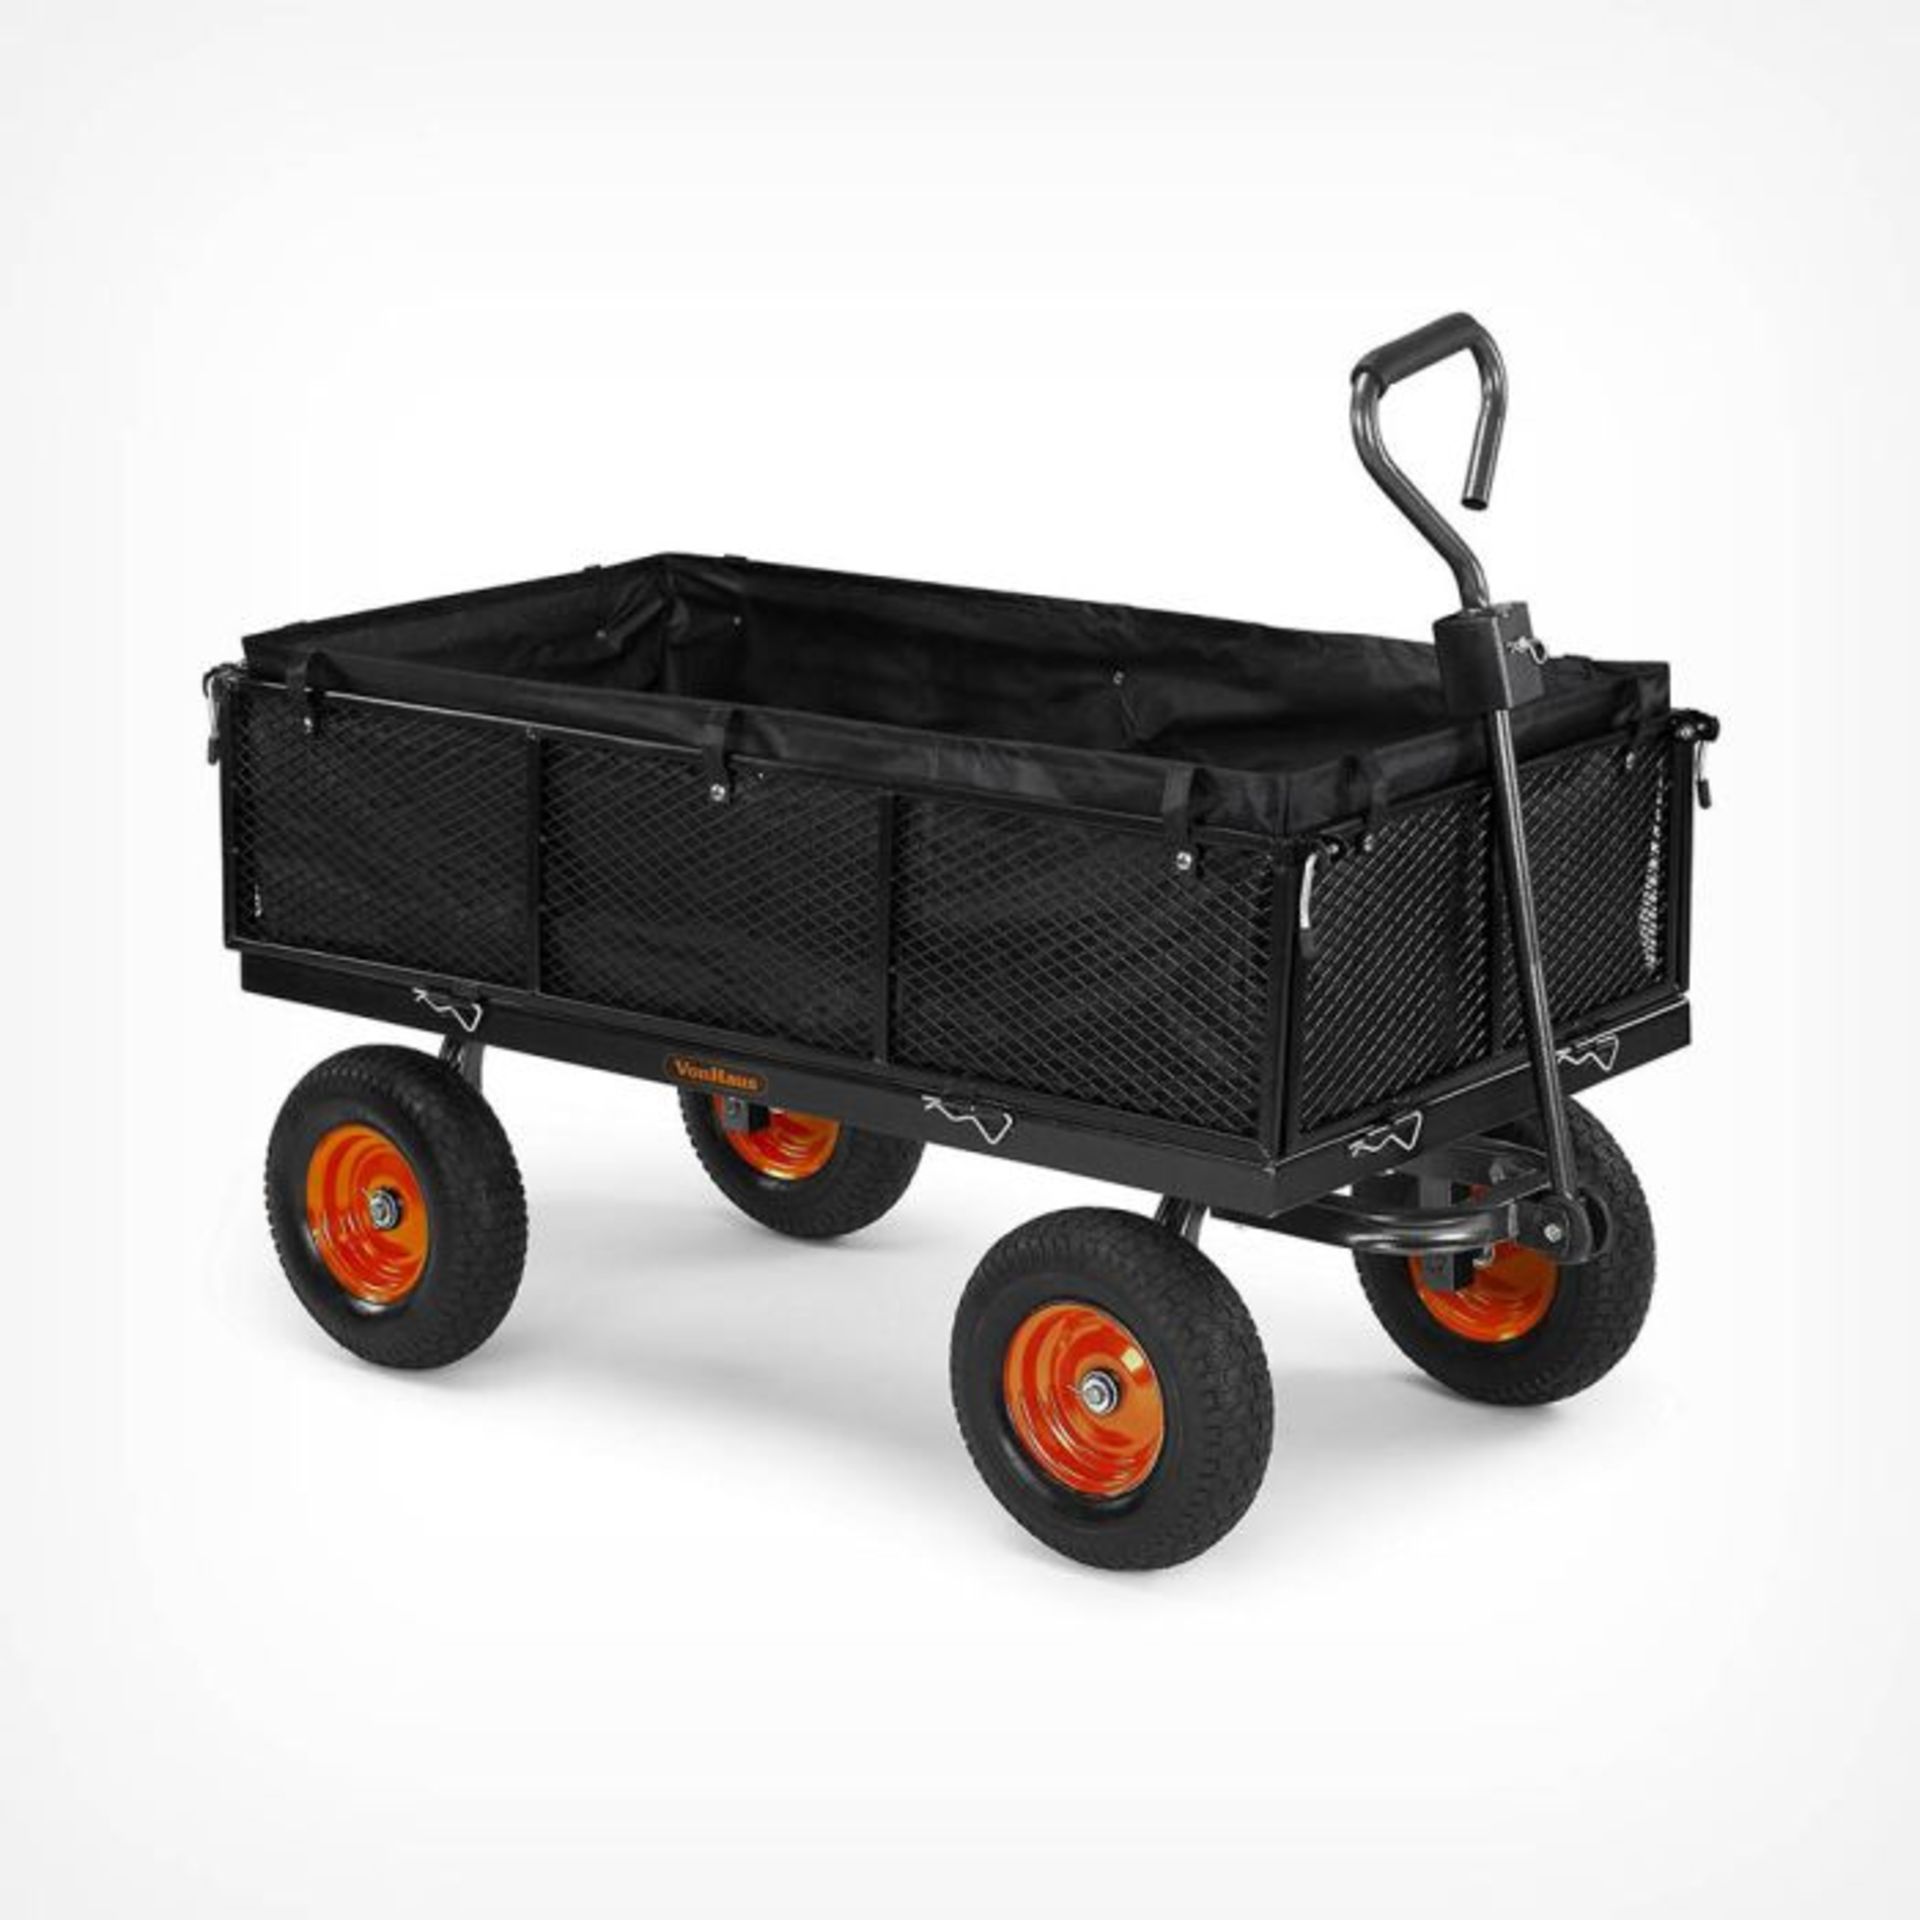 200L Mesh Garden Trolley Cart. - ER37. The strong black steel that makes up the cart’s structure